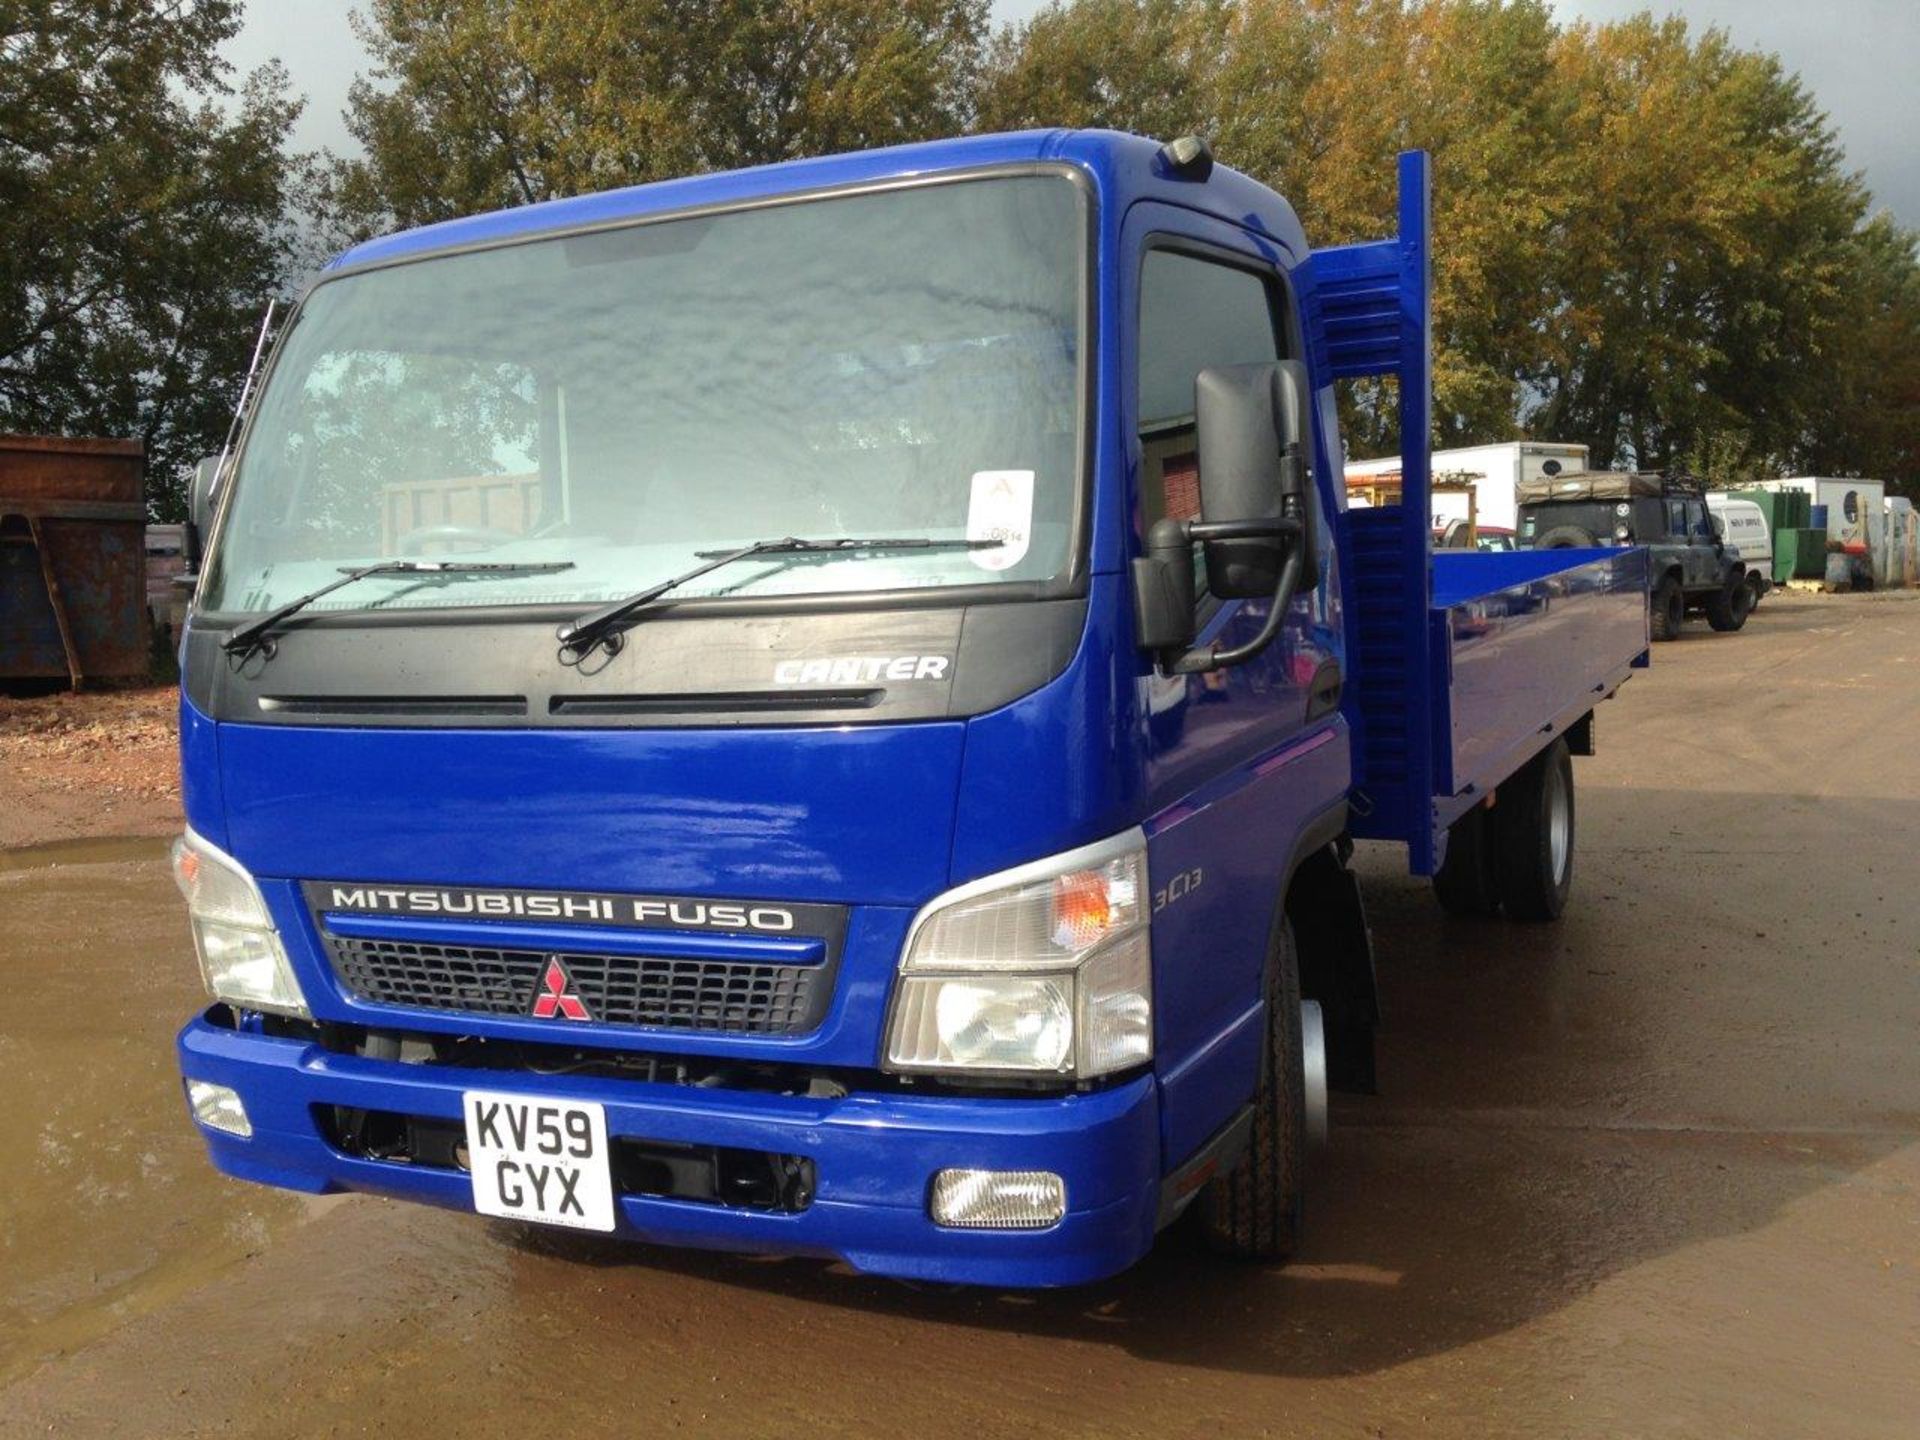 2009/59 REG MITSUBISHI FUSO CANTER 3C13-34 LWB 14 FT DROPSIDE TRUCK ONE OWNER - Image 2 of 10